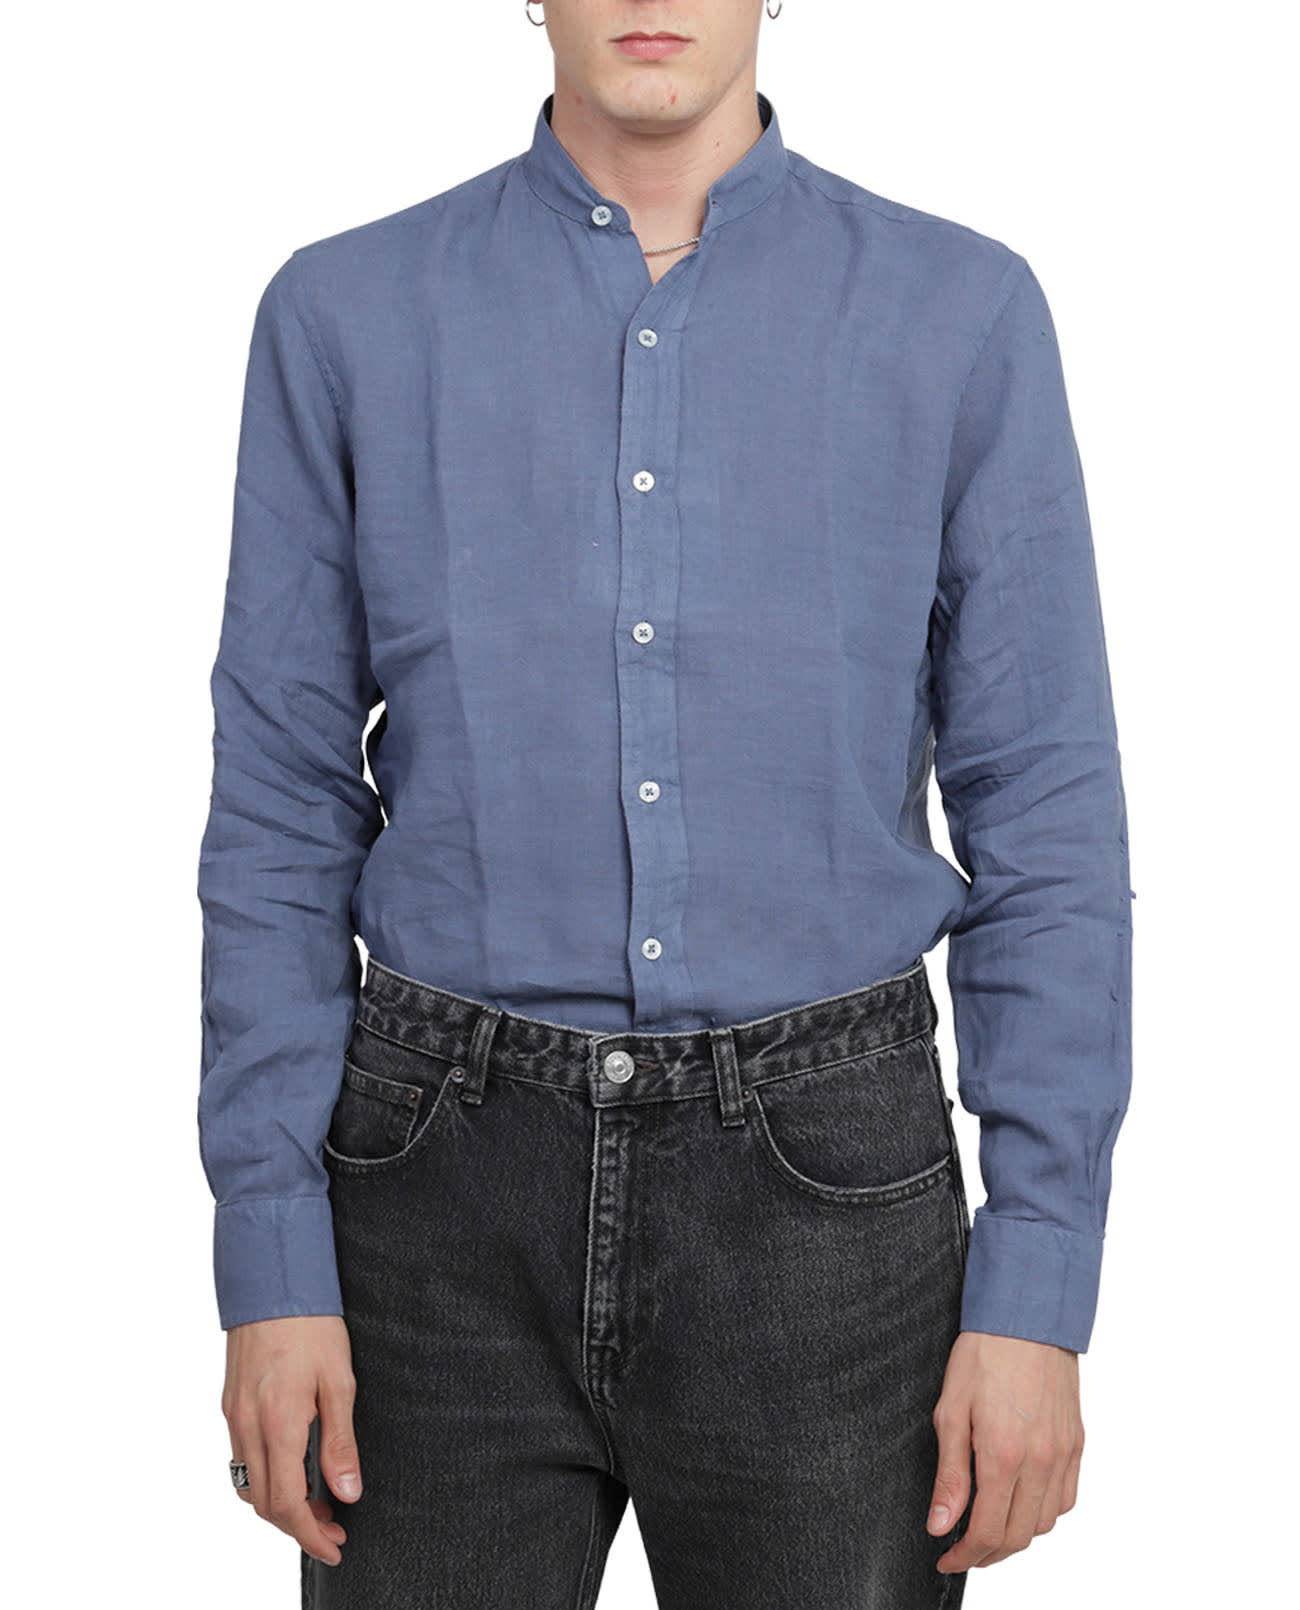 Doppiaa Aamilcare Periwinkle Shirt